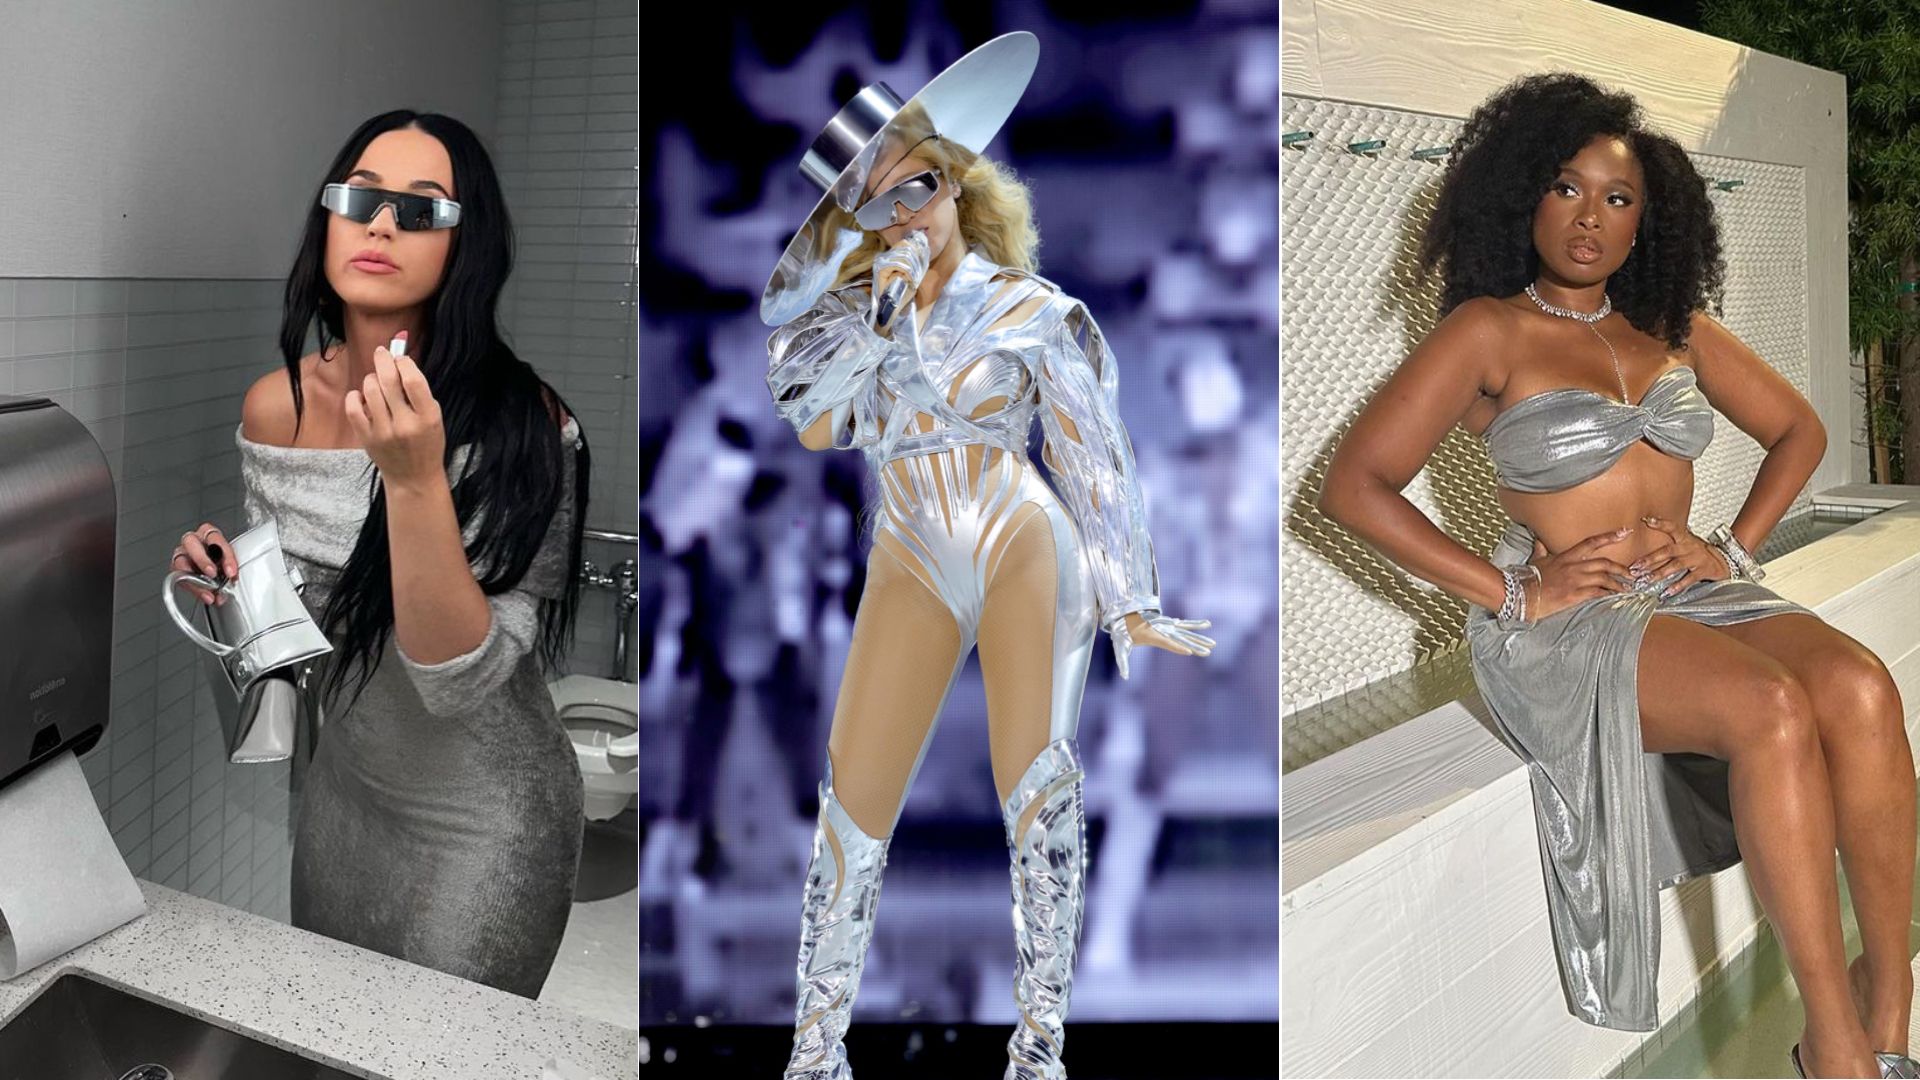 Katy Perry, Jennifer Hudson, and more flashy celebrity styles from Beyoncé's birthday show